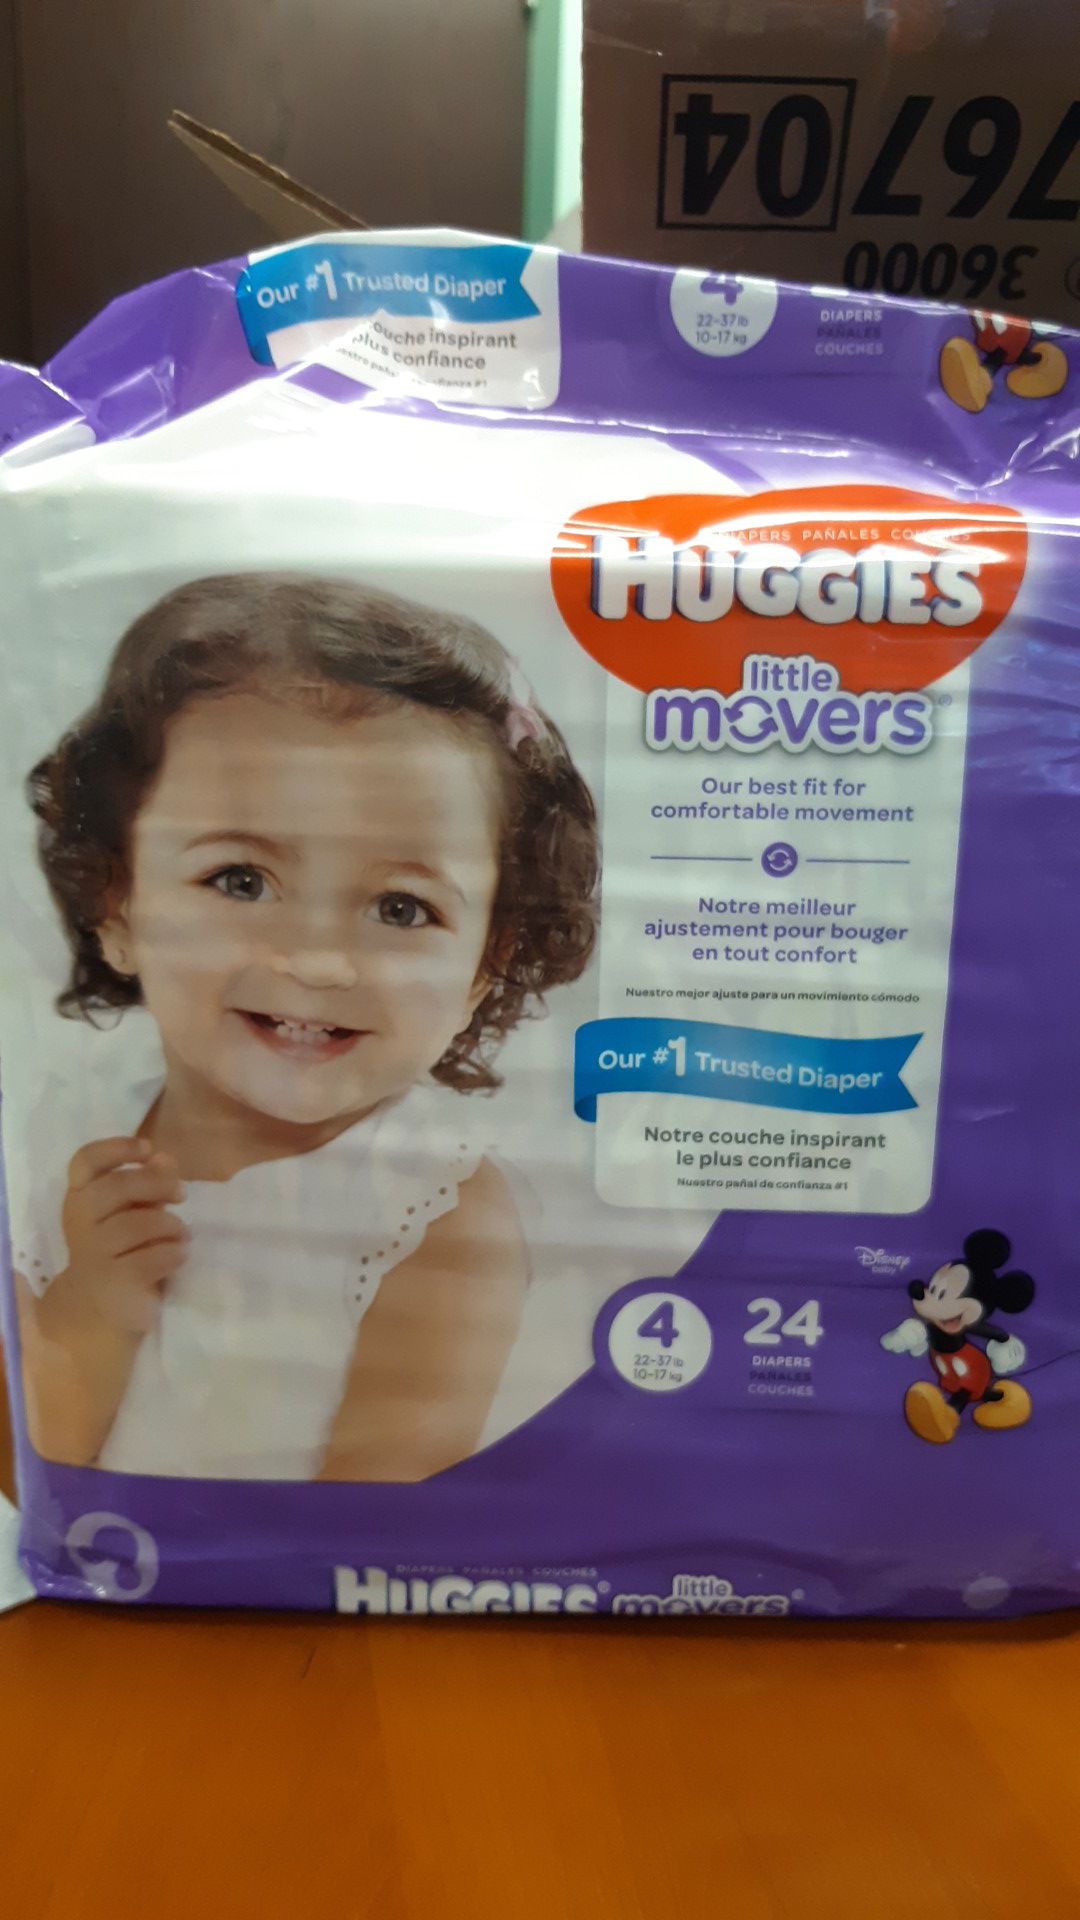 Little size movers huggies diapers 4T 22-37lb 24 diapers